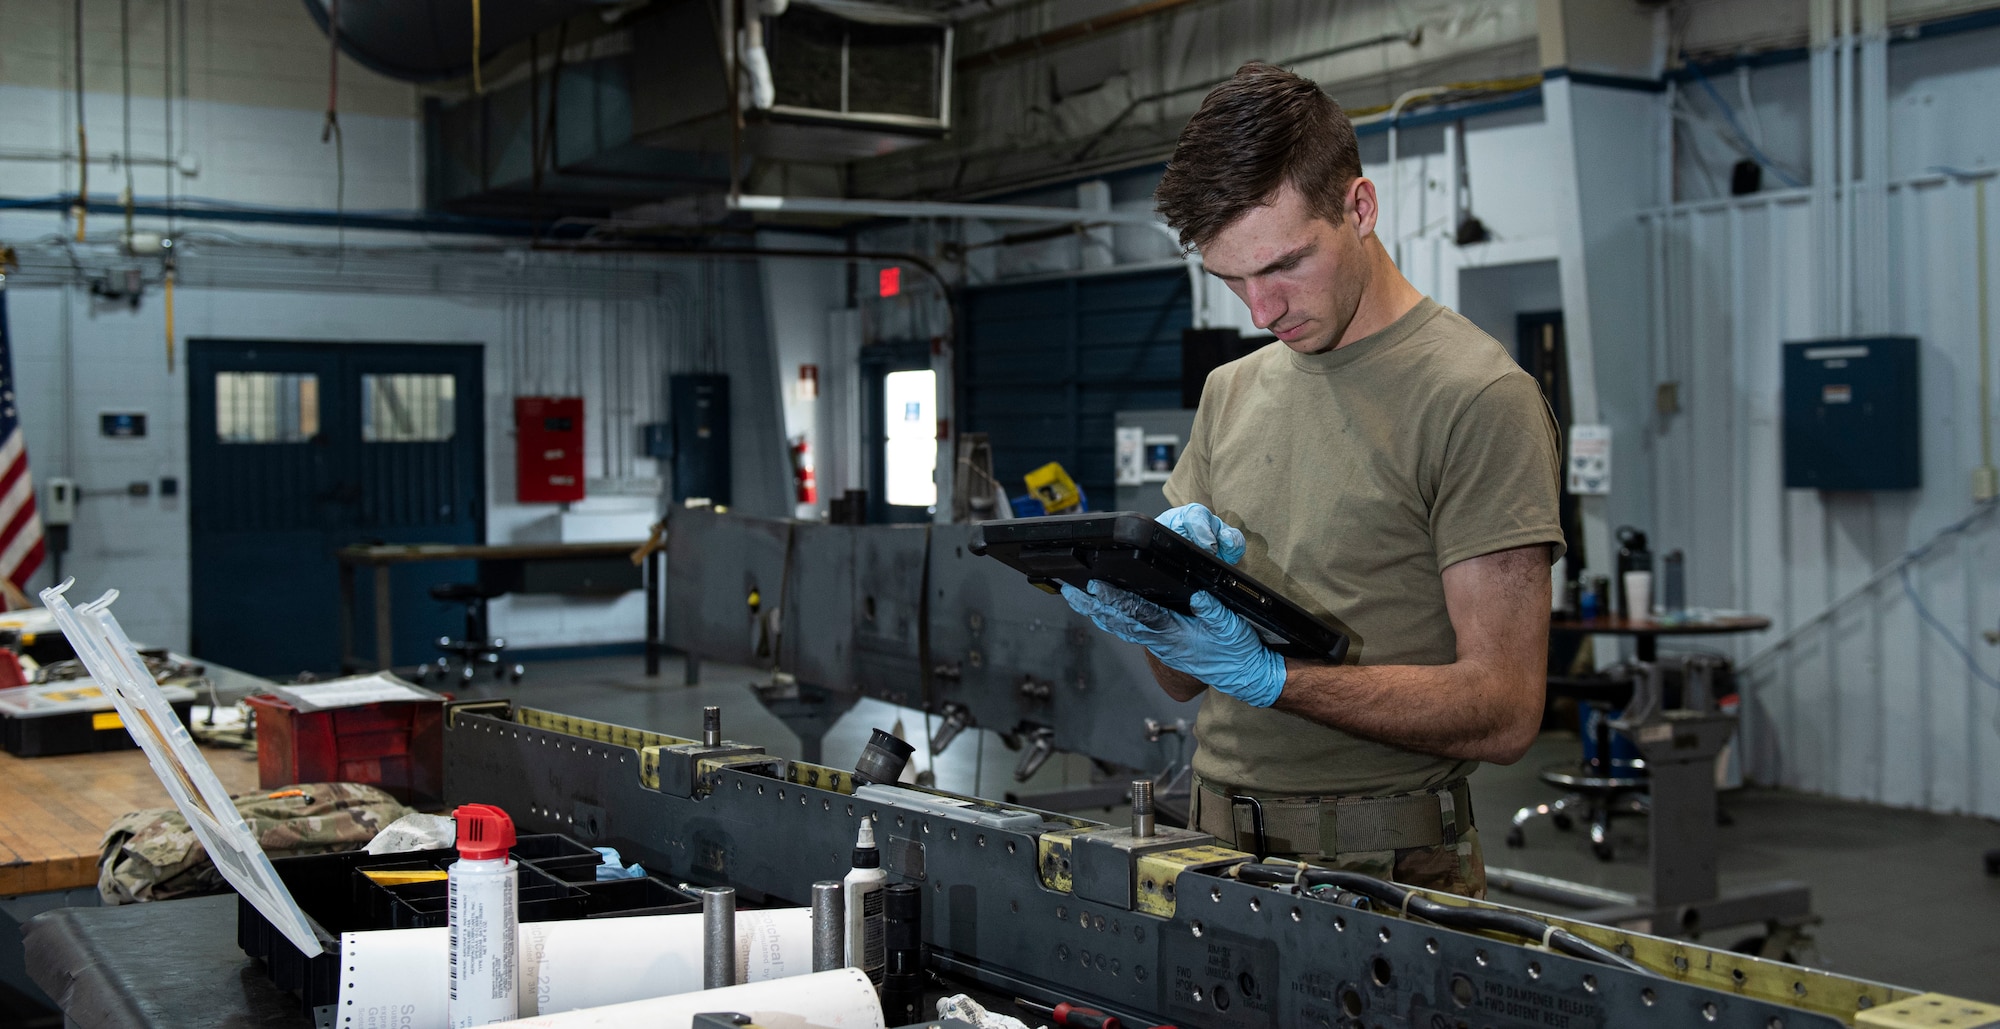 Senior Airman Isaac Carlsen, 4th Munitions Squadron maintenance member, performs an 18-month inspection on a Launcher-128 at Seymour Johnson Air Force Base, North Carolina, May 12, 2022. Airmen perform inspections on weaponry to reduce the possibility of malfunctions while loading missiles onto F-15E Strike Eagle aircraft. (U.S. Air Force photo by Airman 1st Class Sabrina Fuller)